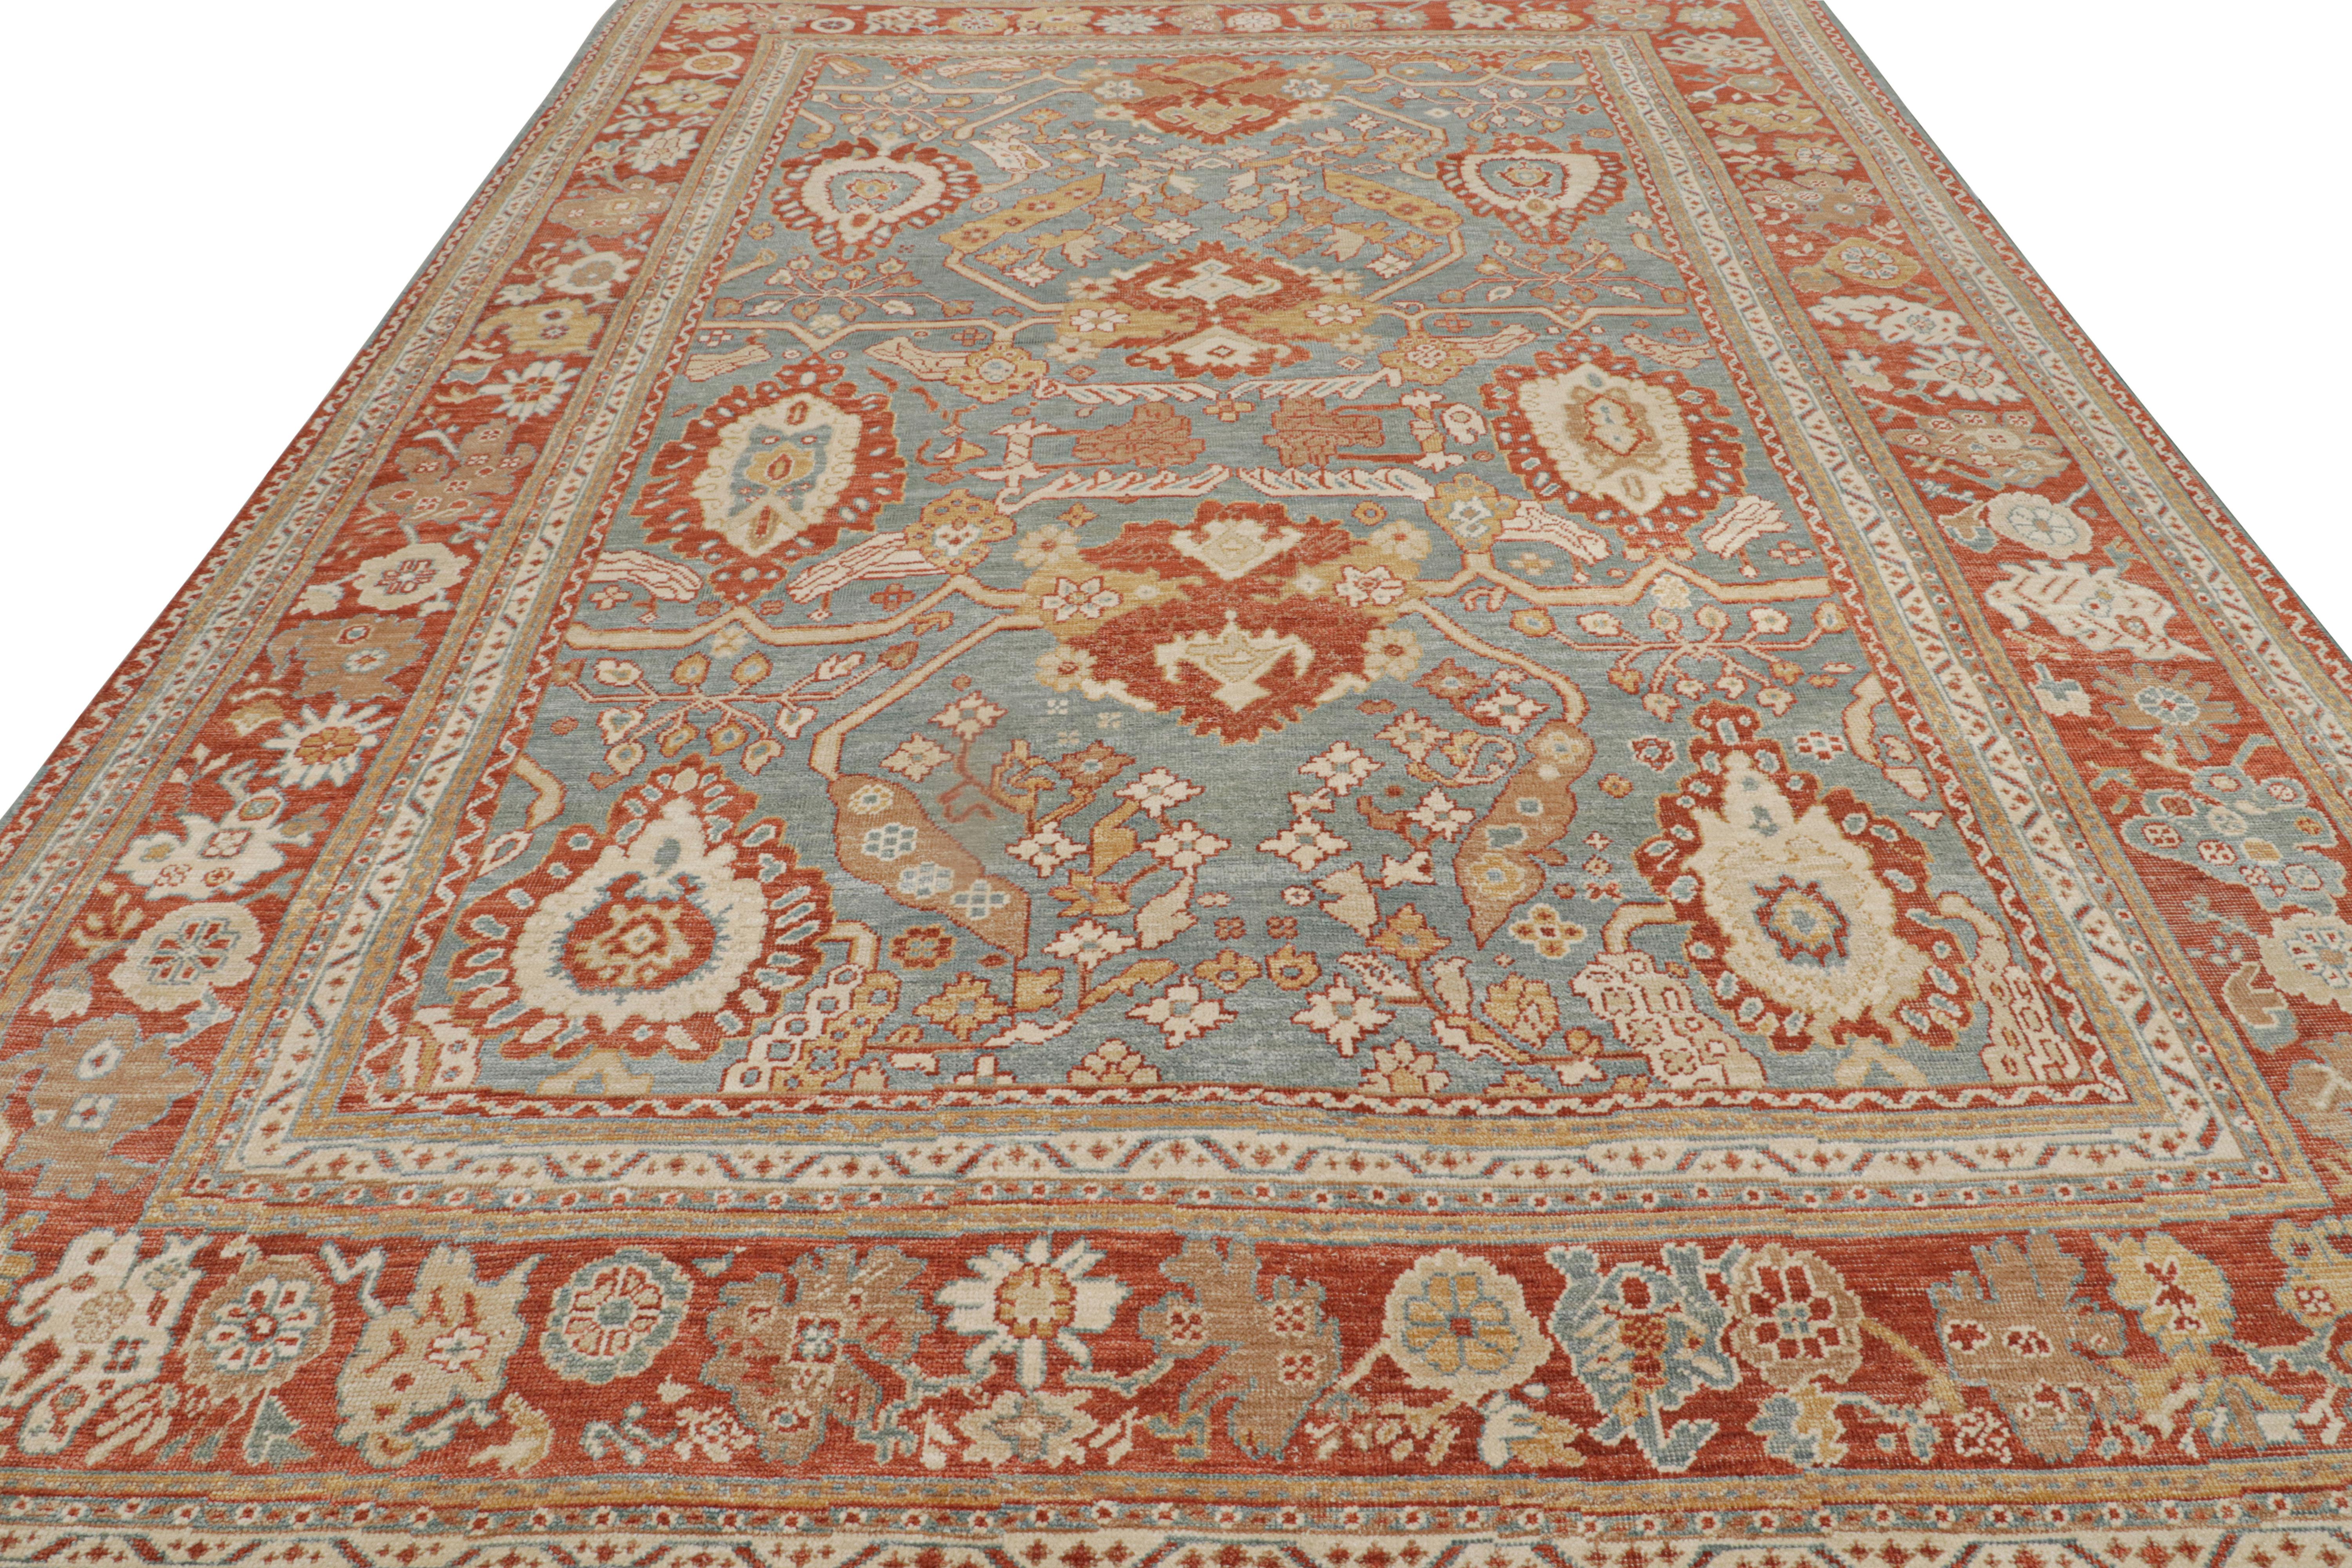 Indian Rug & Kilim’s Oushak Style Rug In Red, Blue and Brown Floral Pattern For Sale